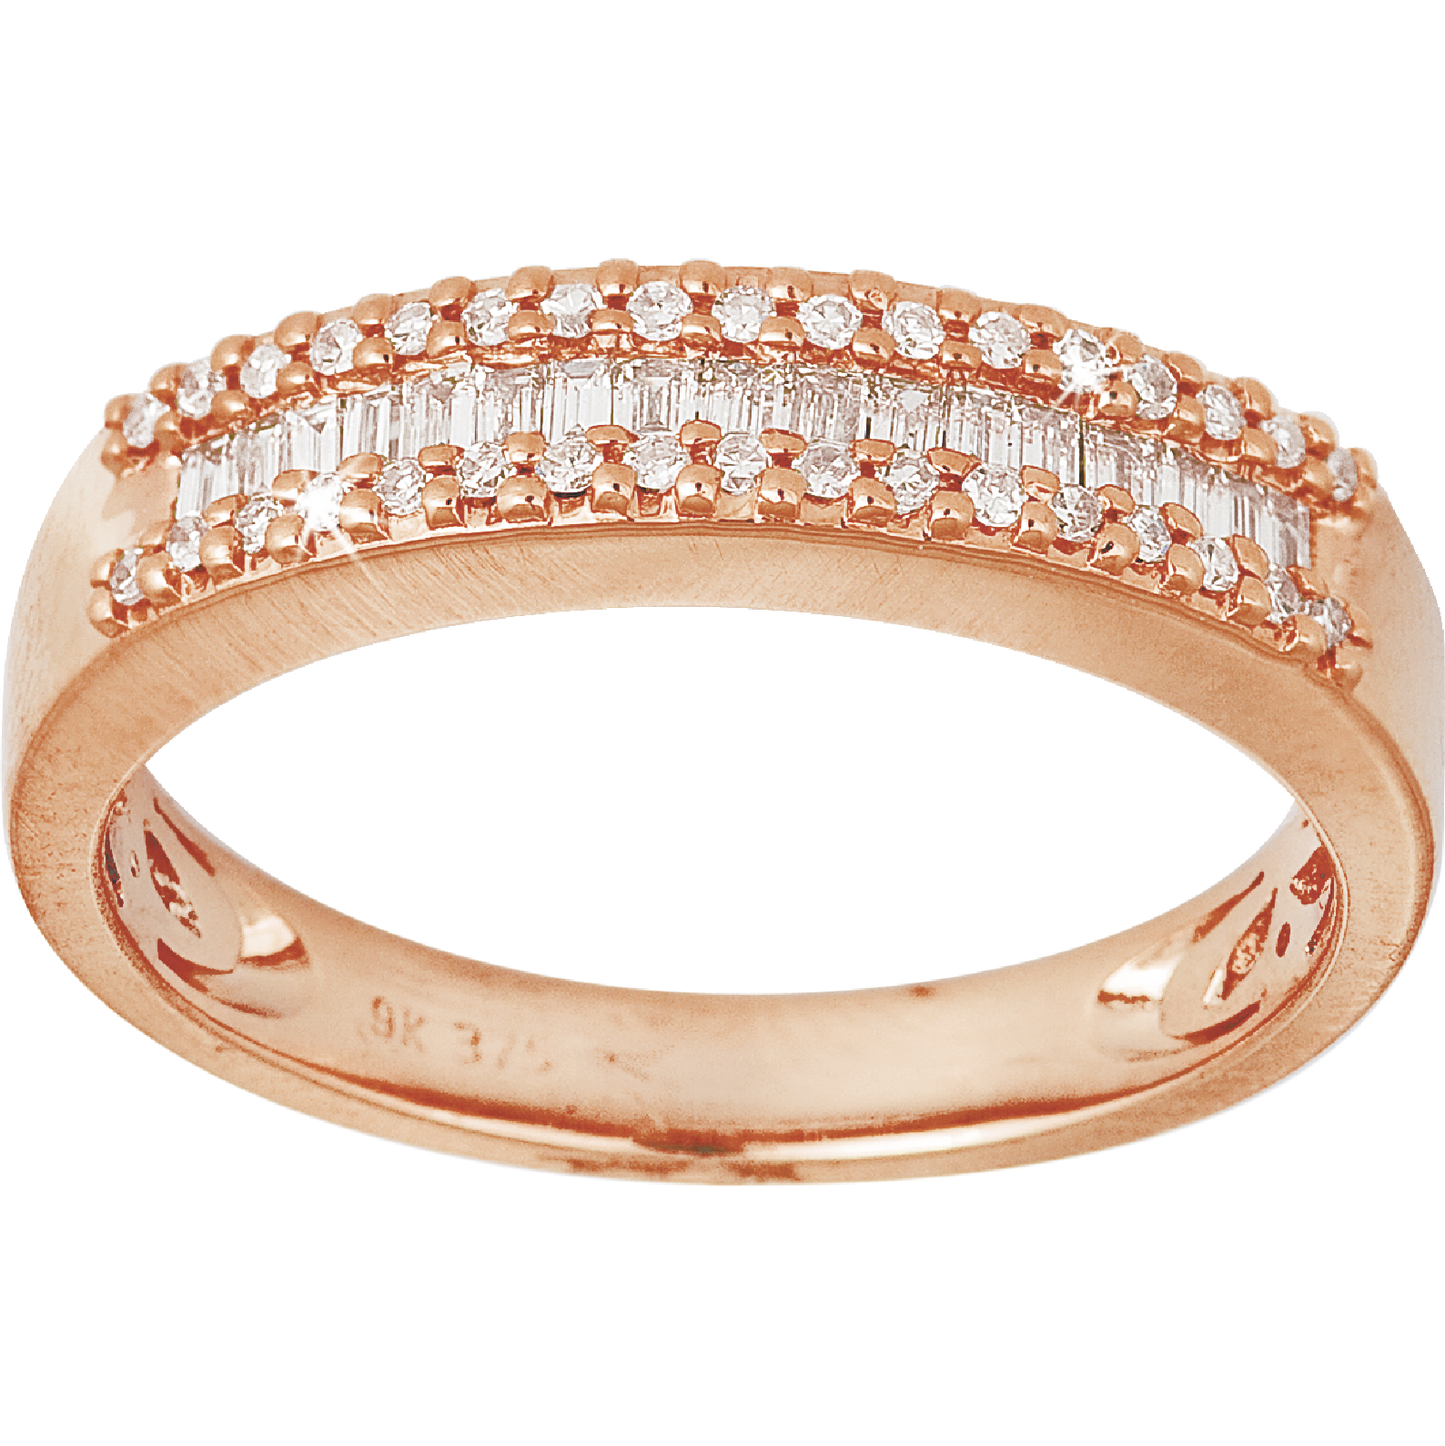 0.10ct Diamond Baguette Eternity Ring in 9ct Rose Gold